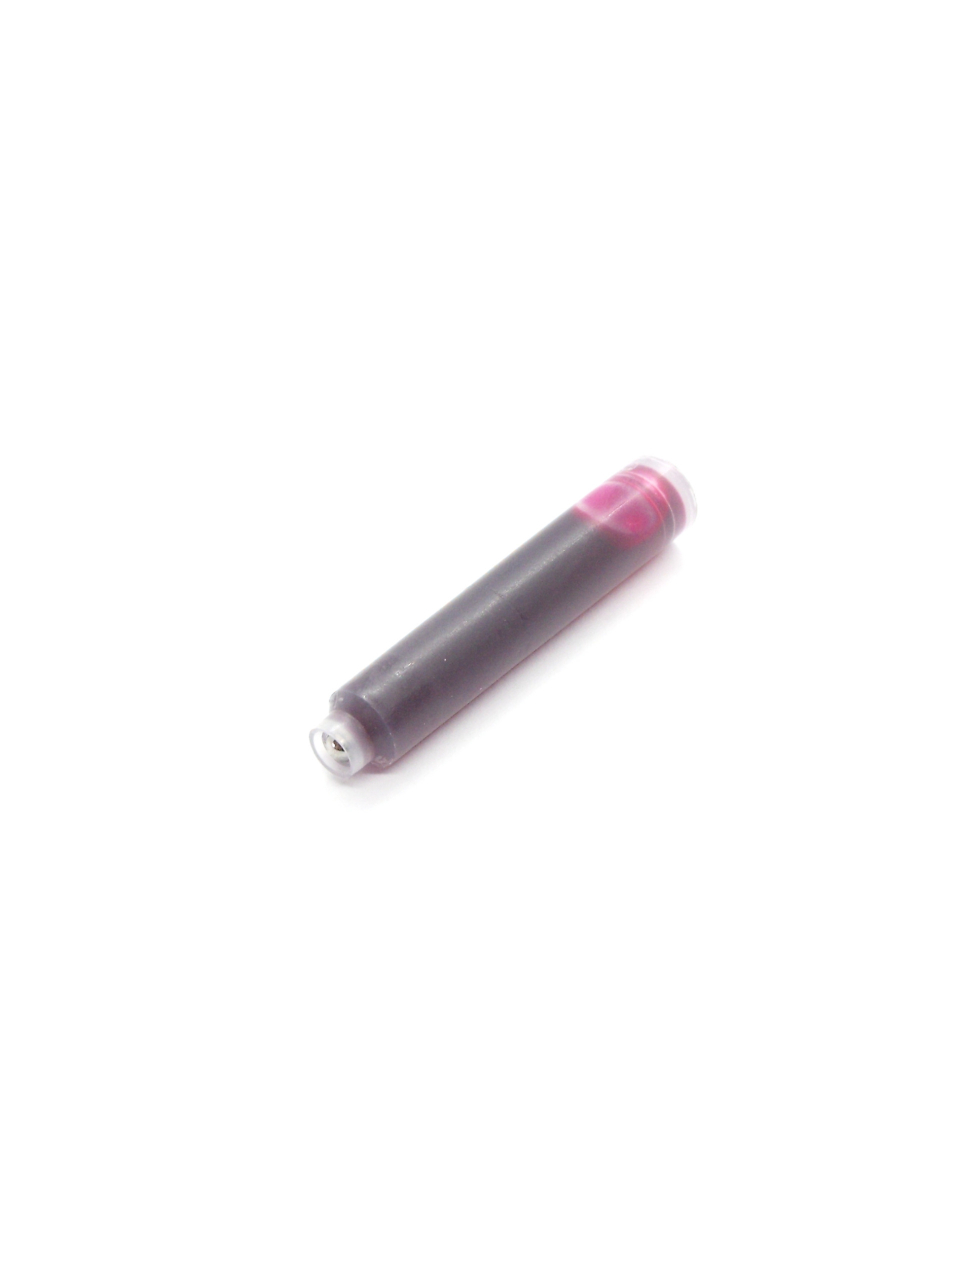 Cartridges For Montblanc Fountain Pens (Pink)